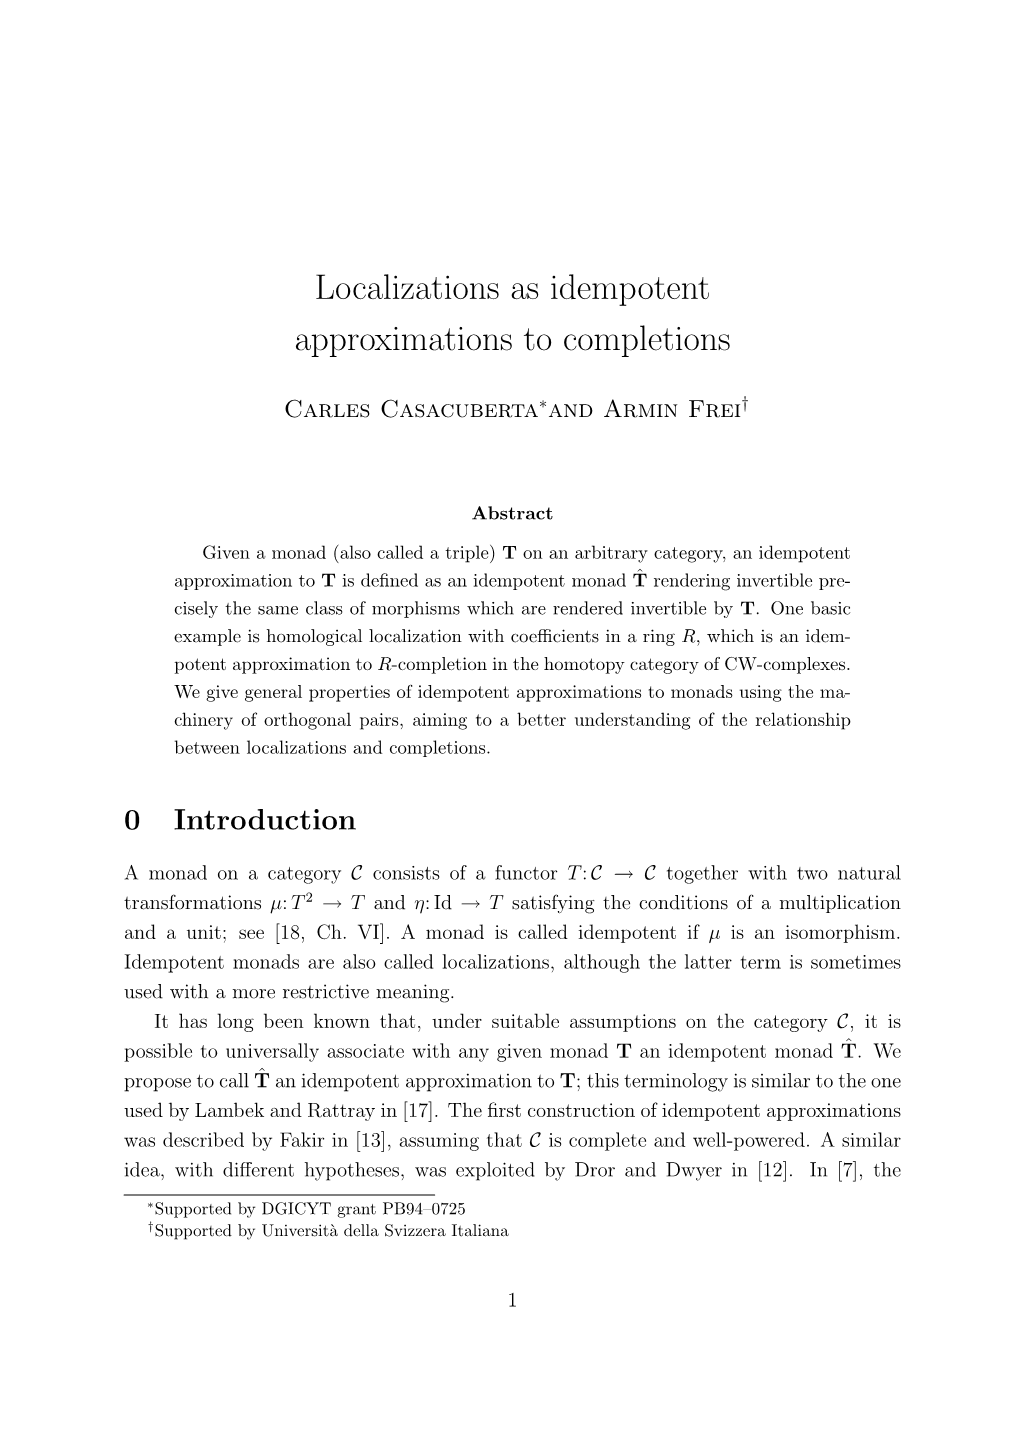 Localizations As Idempotent Approximations to Completions